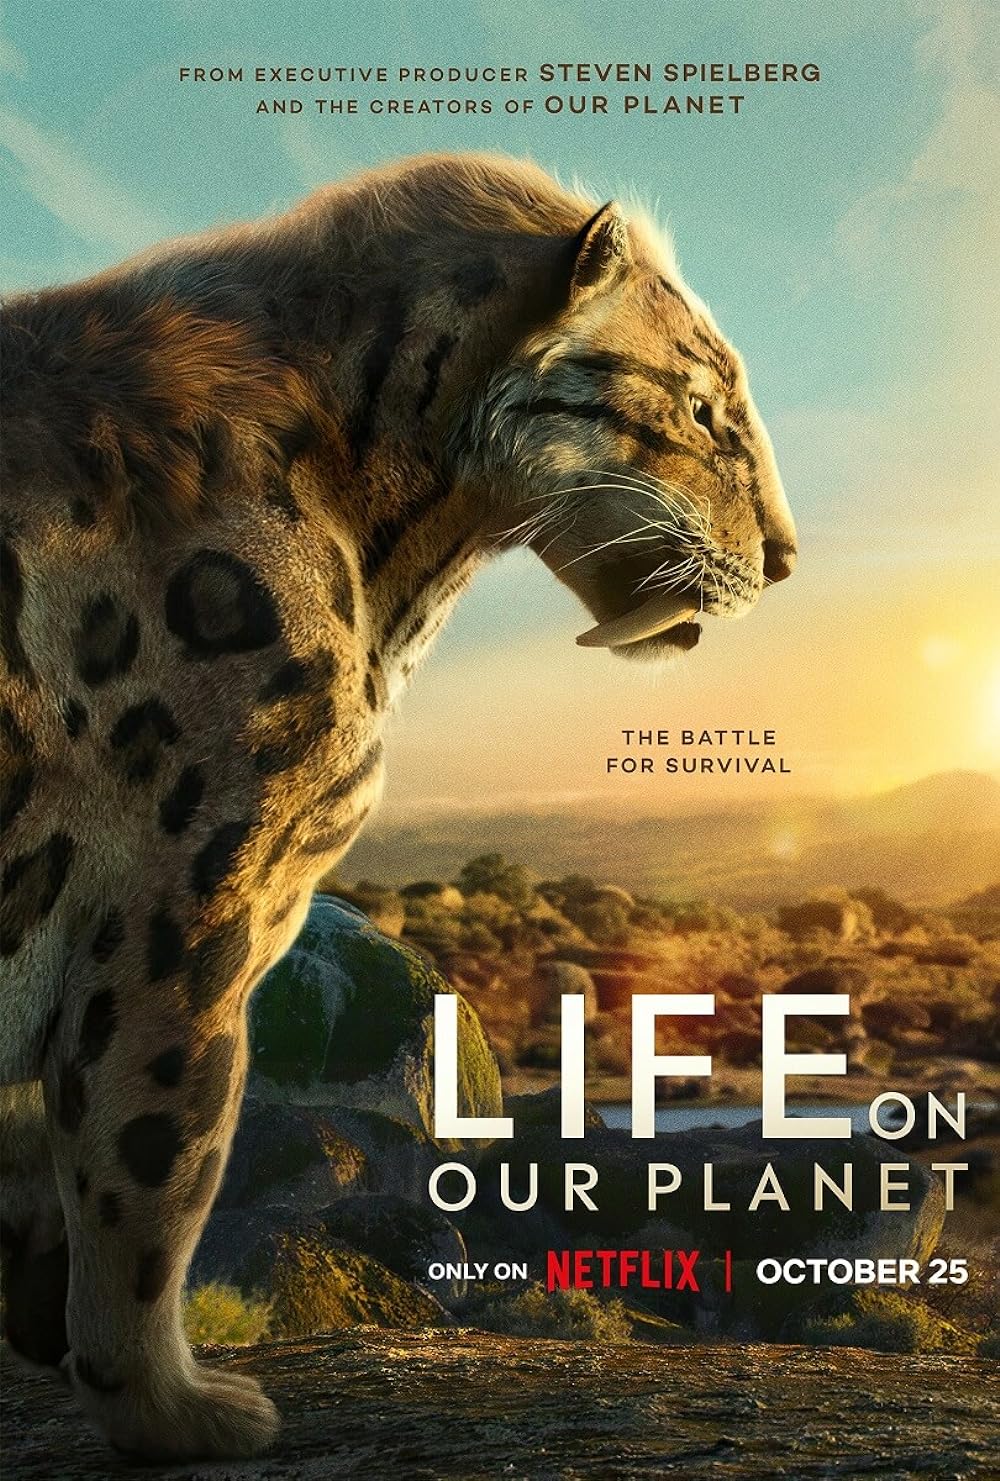 Life on Our Planet (October 25) - Netflix
Life on Our Planet